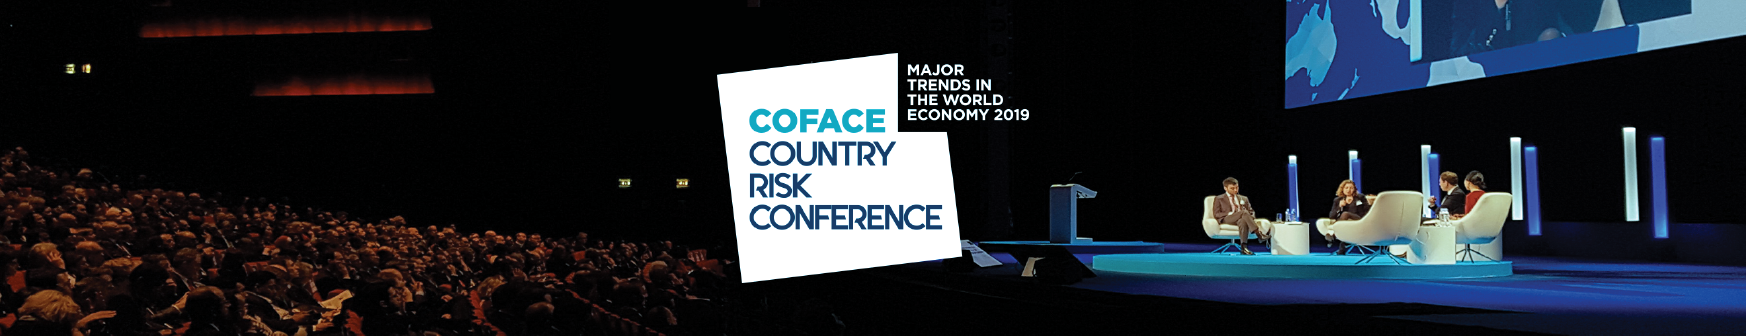 Country Risk Conference 2019